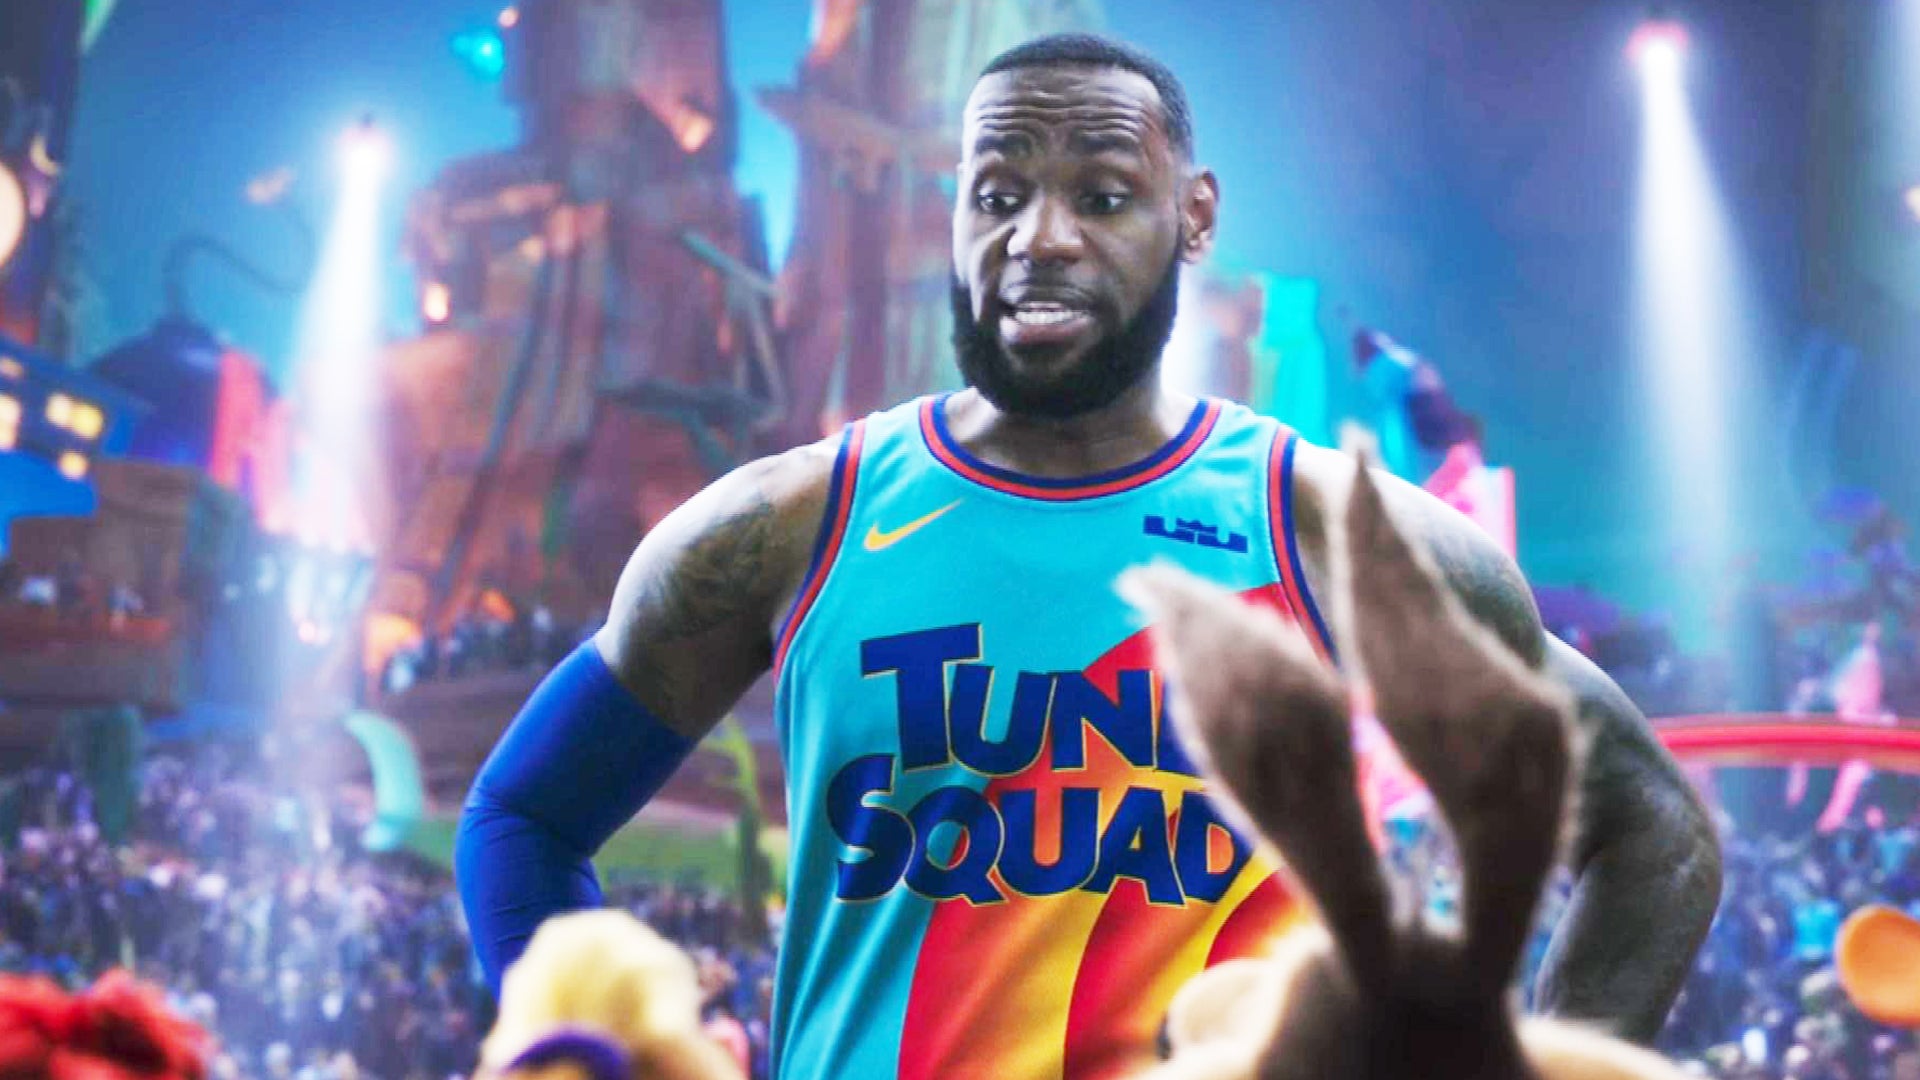 It's the Tune Squad vs. the Goon Squad in Space Jam: A New Legacy trailer